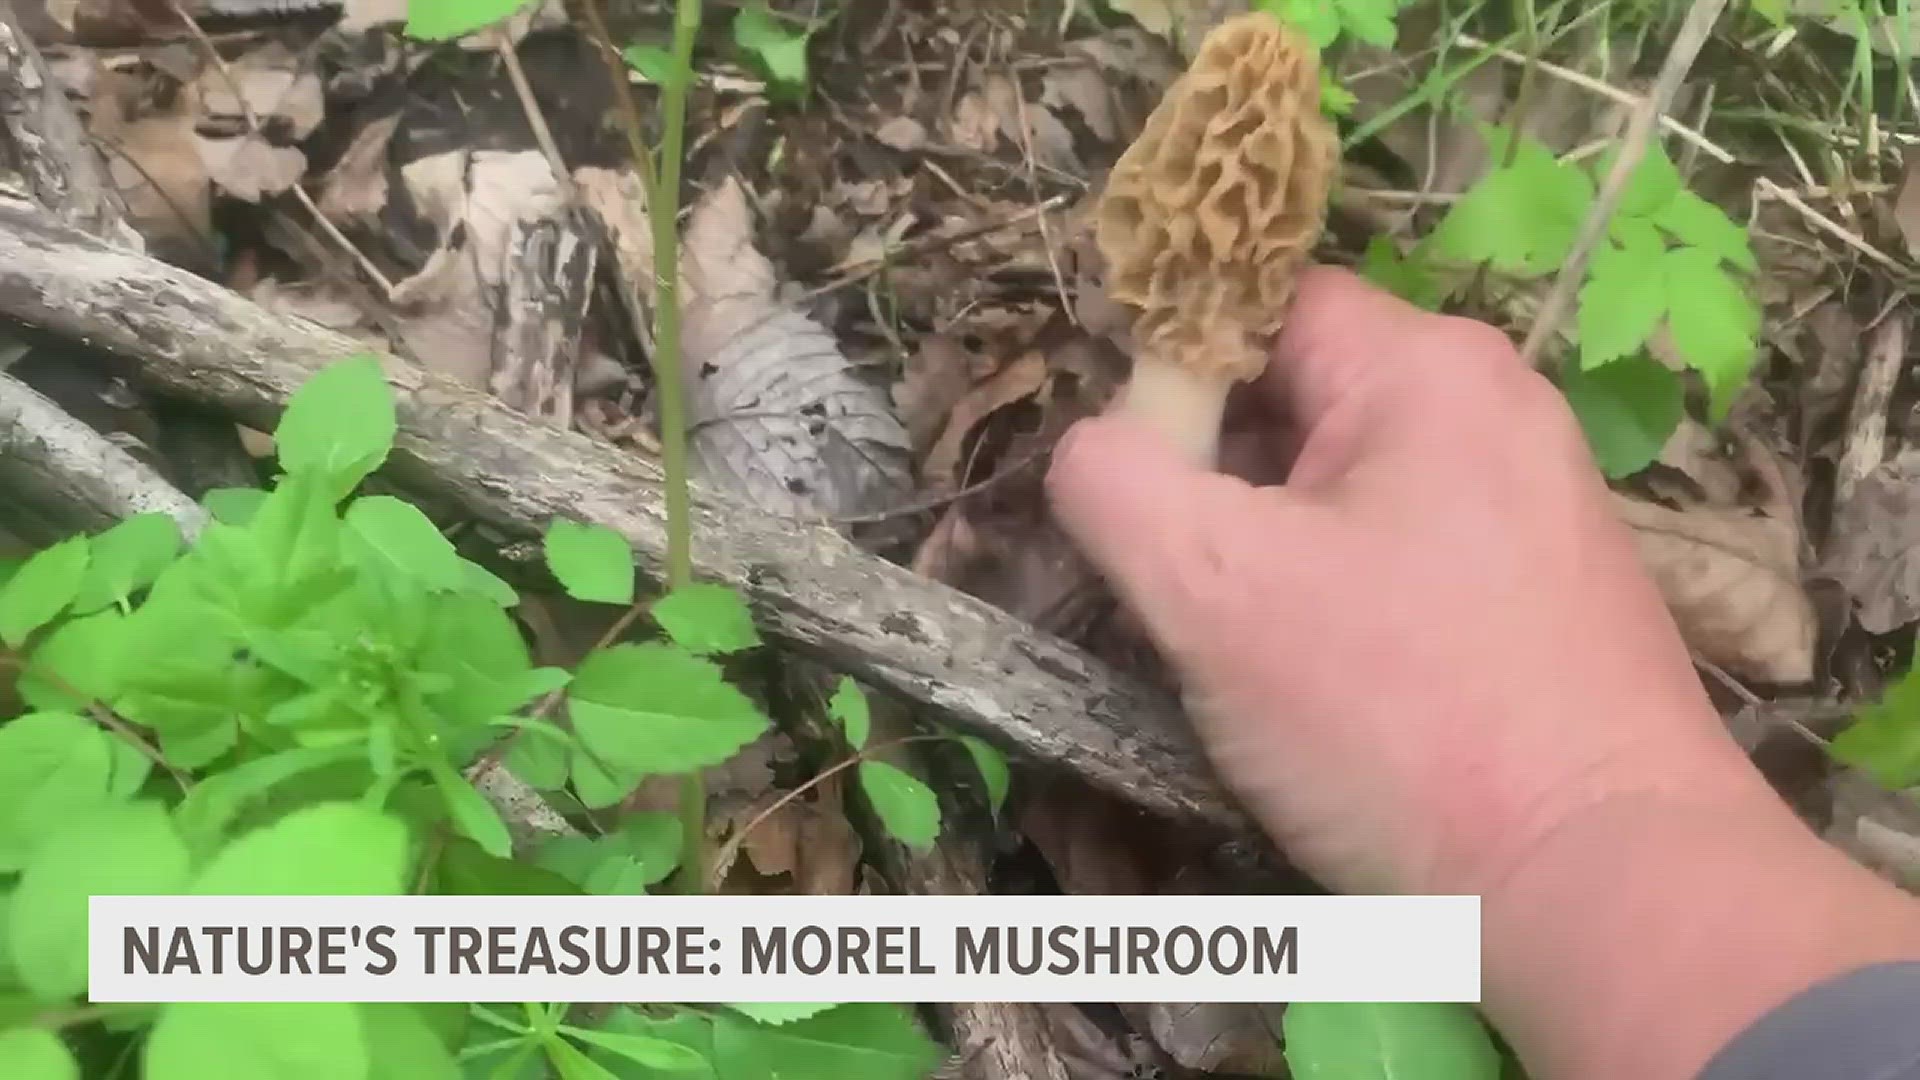 The morel mushroom is a big prize of mushroom hunting. Learn the science behind these exotic-looking mushrooms!